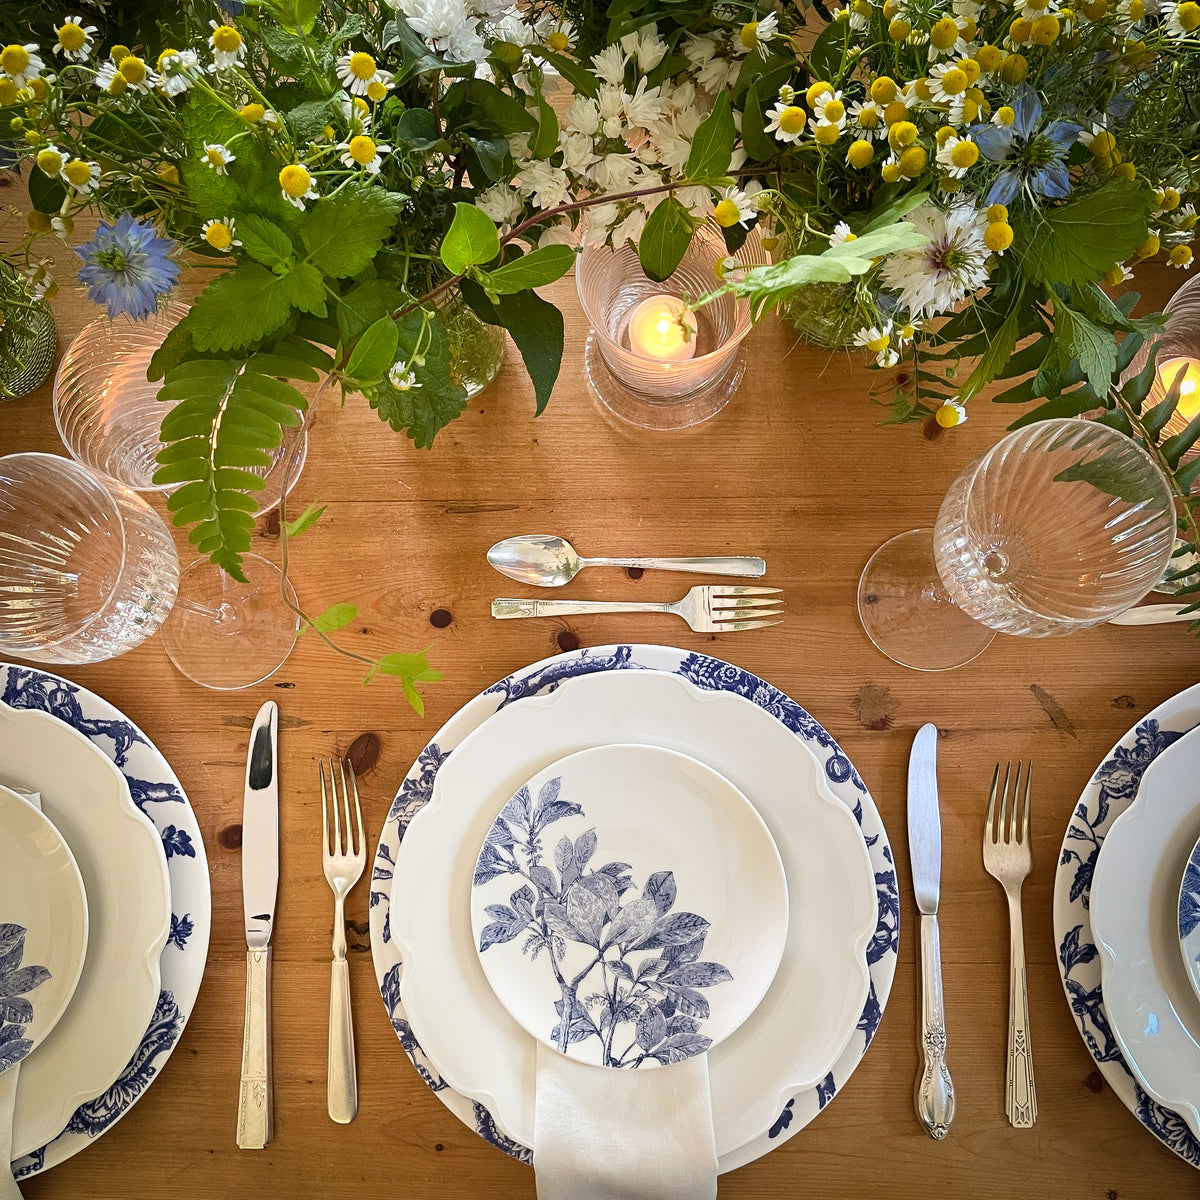 A wooden table set for a meal with Caskata Artisanal Home Arbor Blue Small Plates, heirloom-quality dinnerware, silver cutlery, crystal glasses, lighted candles, and a centerpiece of assorted flowers and greenery.